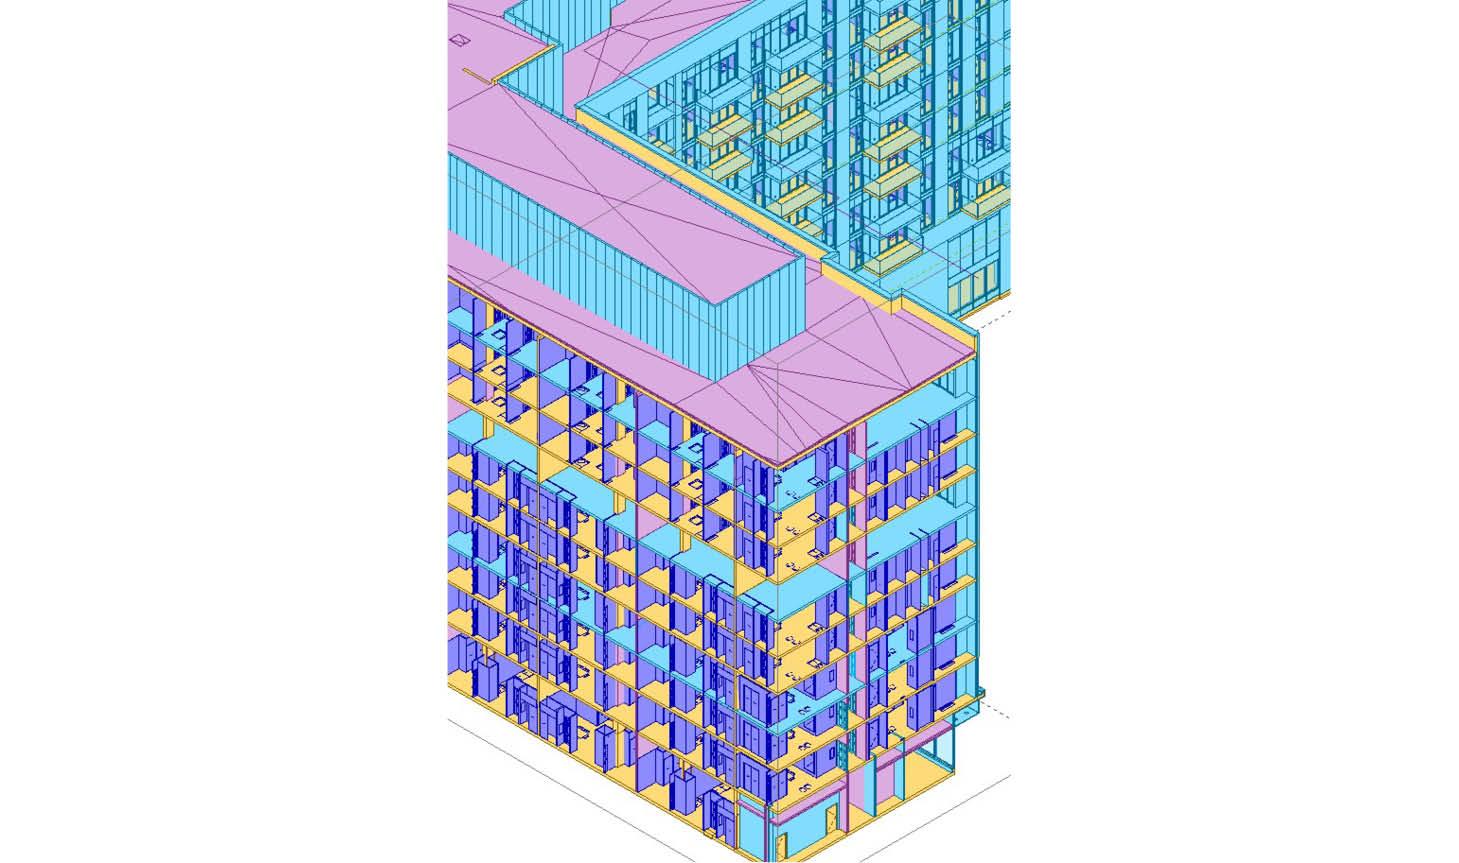 colourful 3D rendering of a condo building made using BIM software